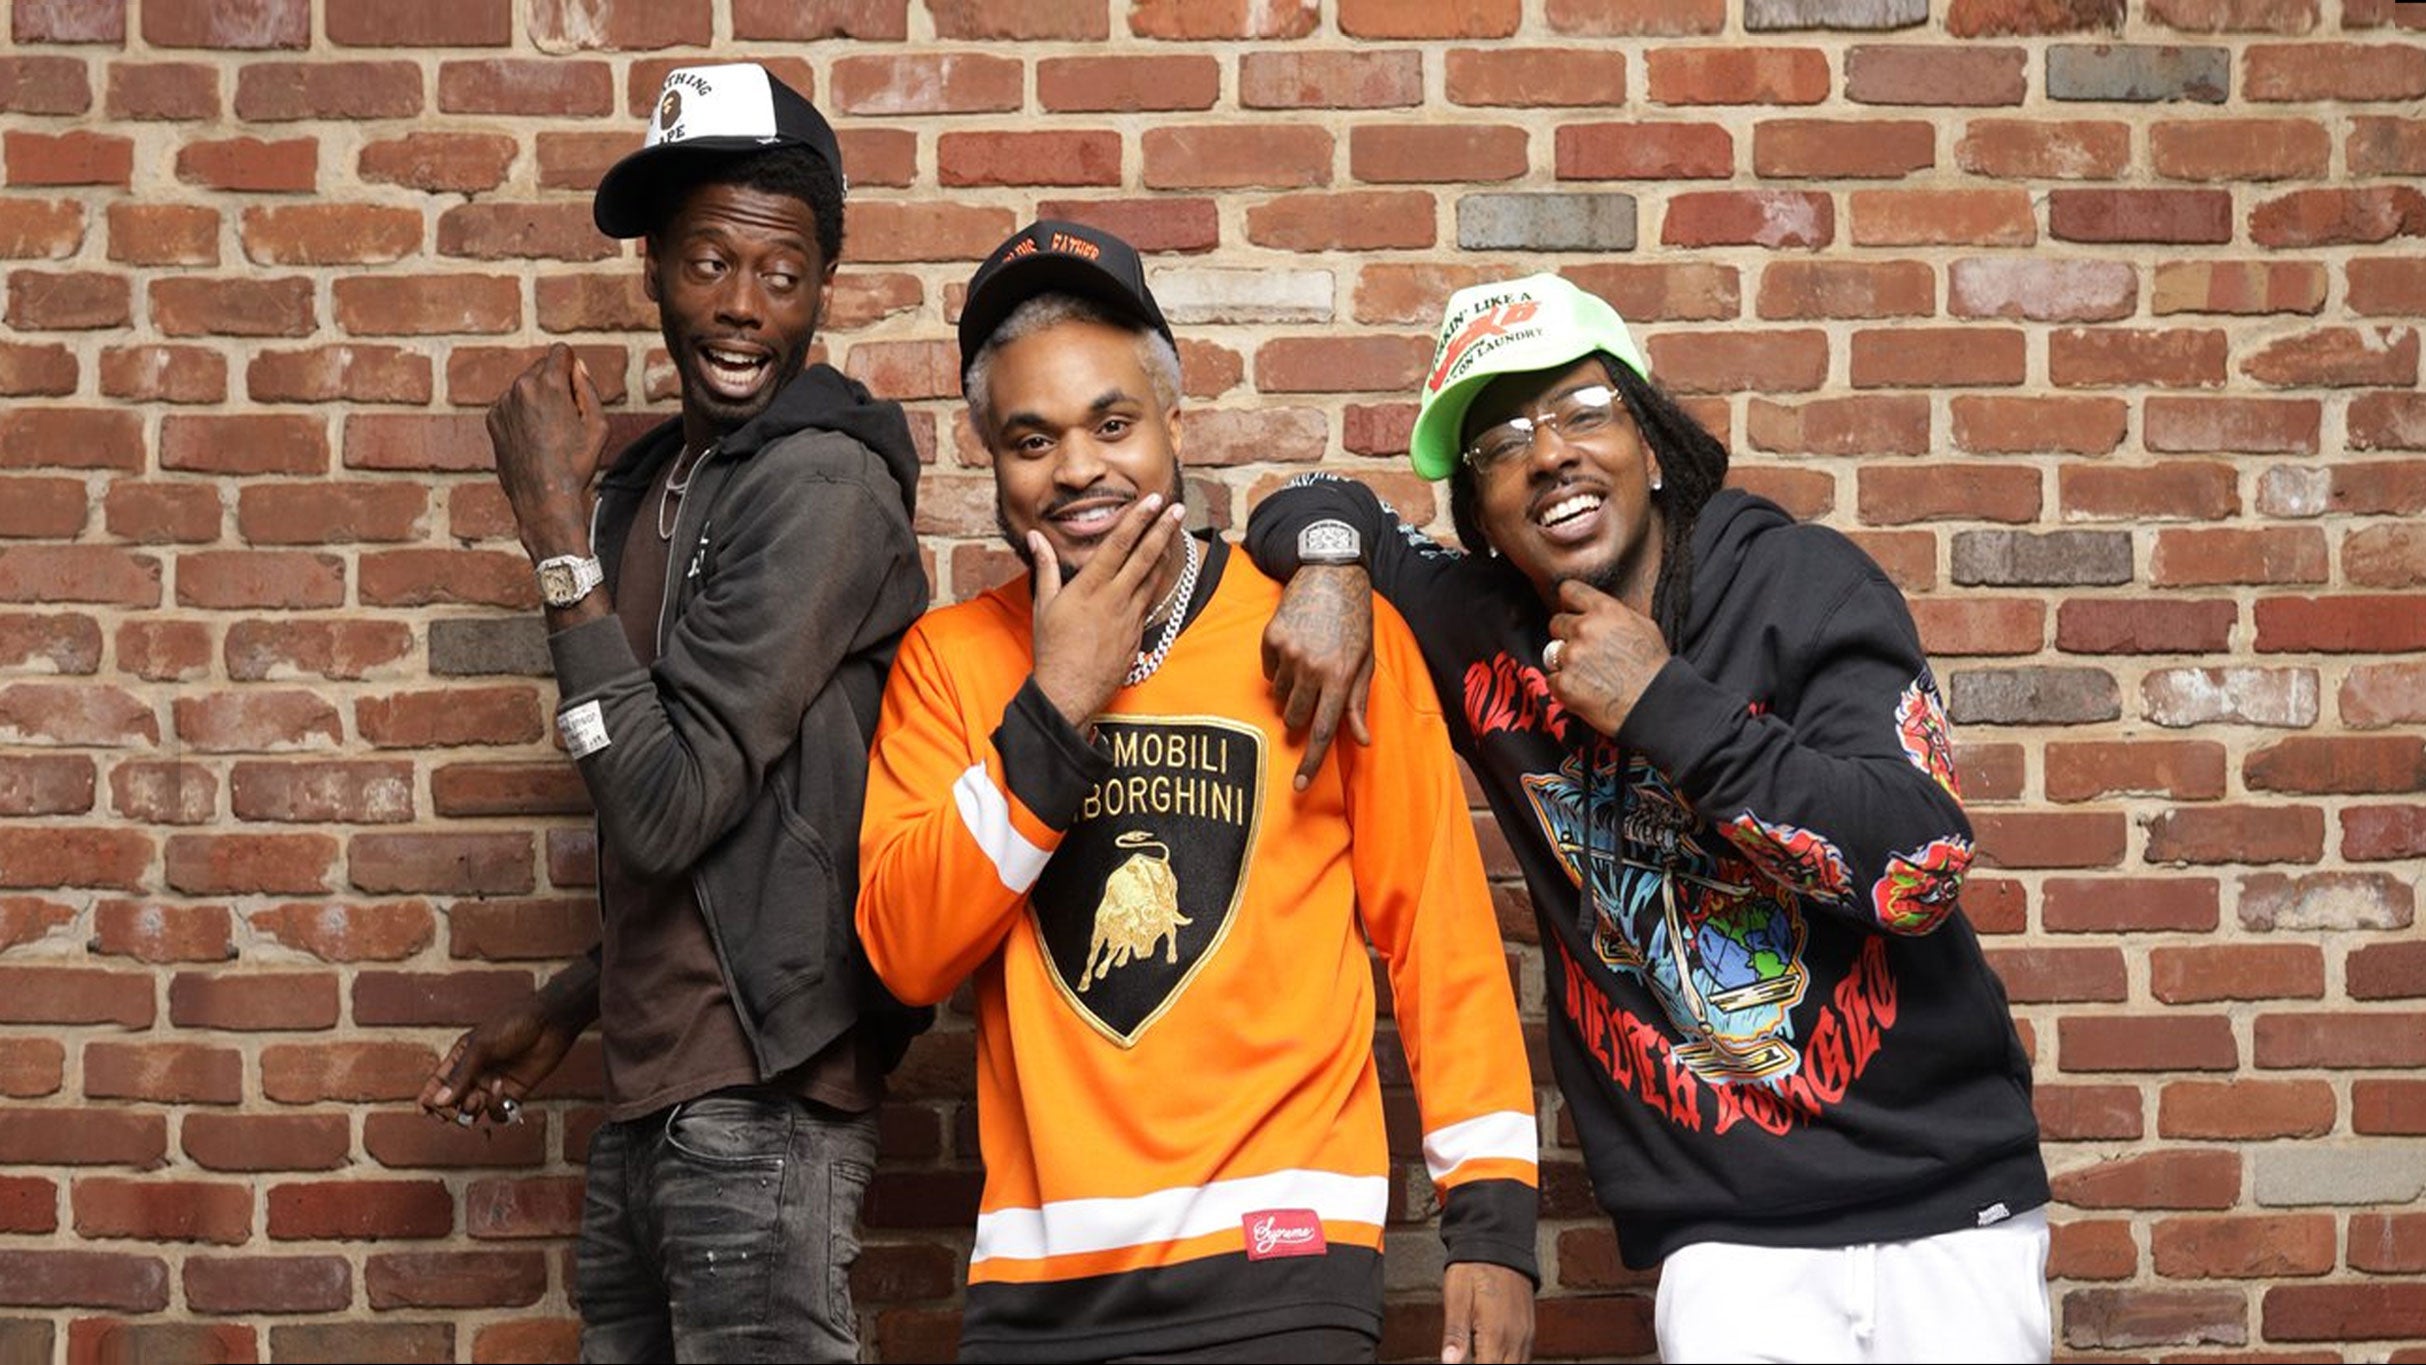 Travis Porter, Roscoe Dash and F.L.Y. -The Bring It Back Tour presales in Detroit